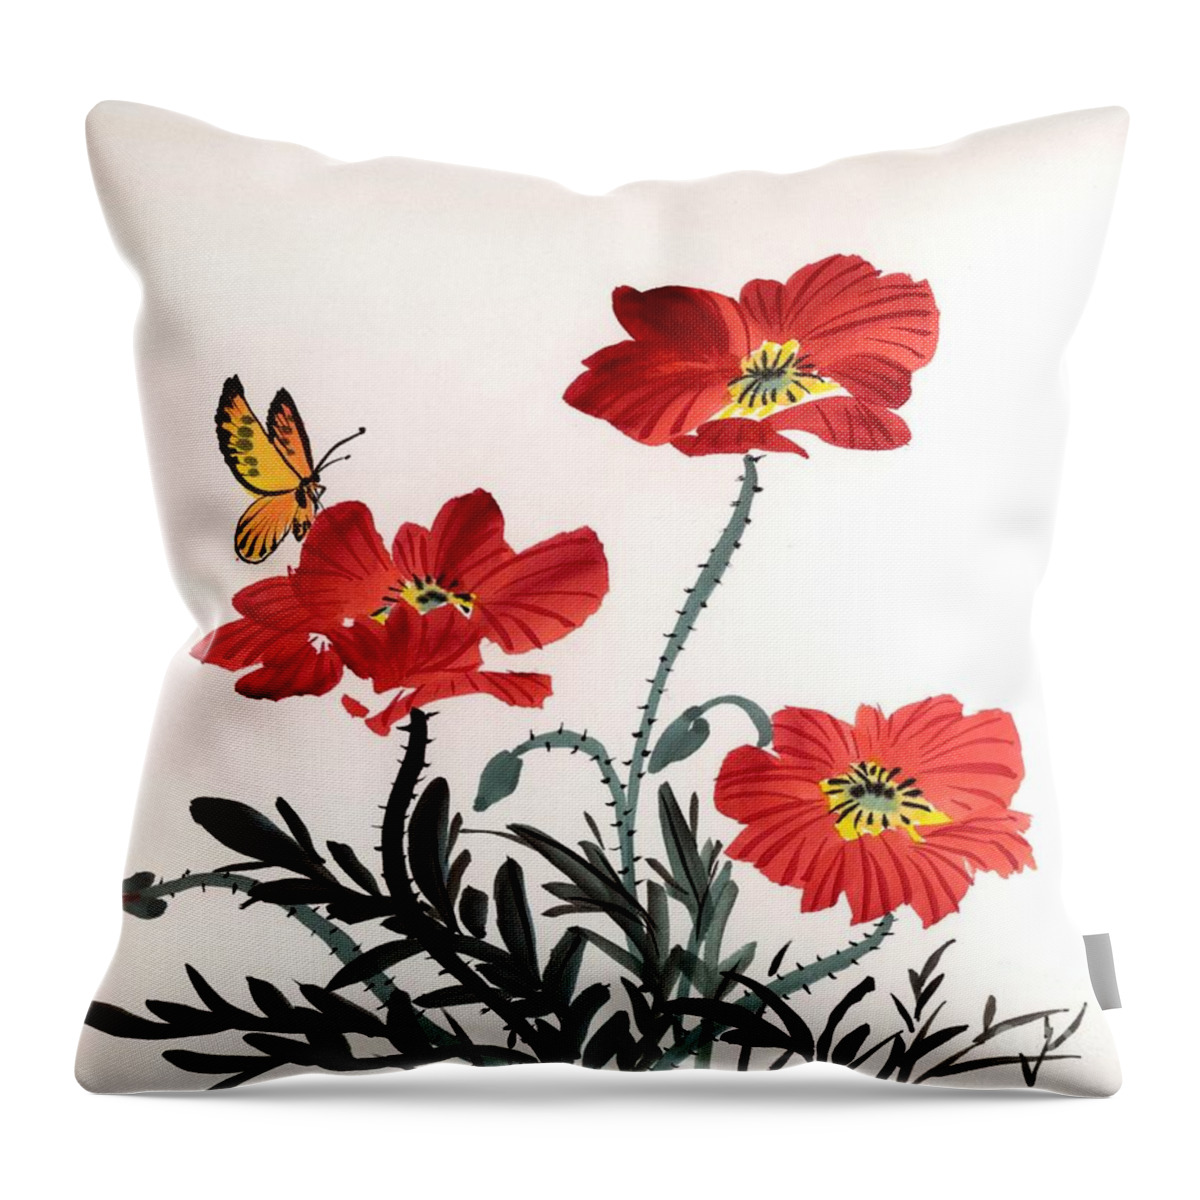 Floral Throw Pillow featuring the painting Red Poppies by Yolanda Koh